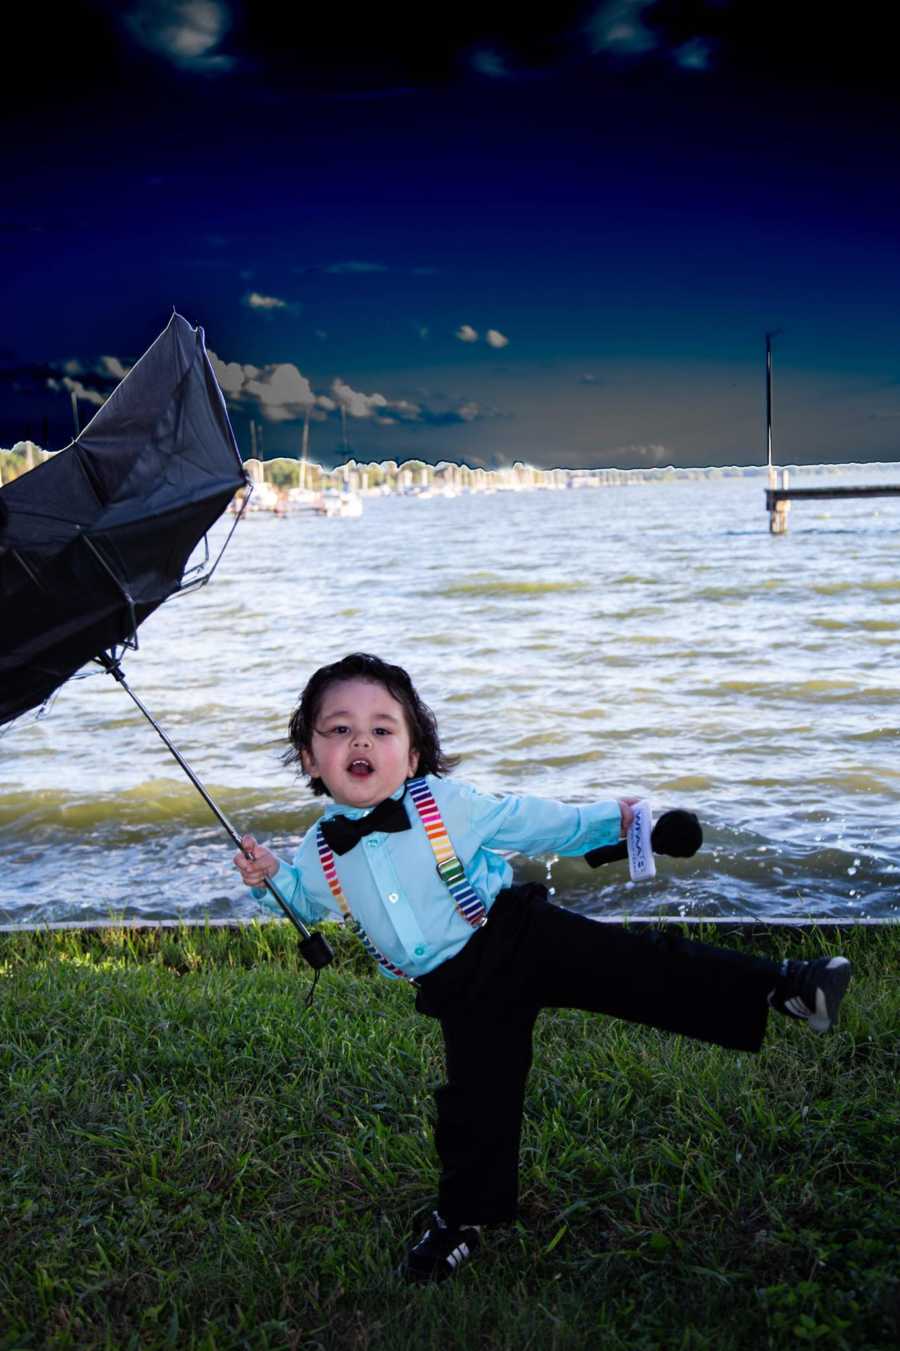 Toddler standing outside dressed as weather man holding microphone and umbrella near body of water